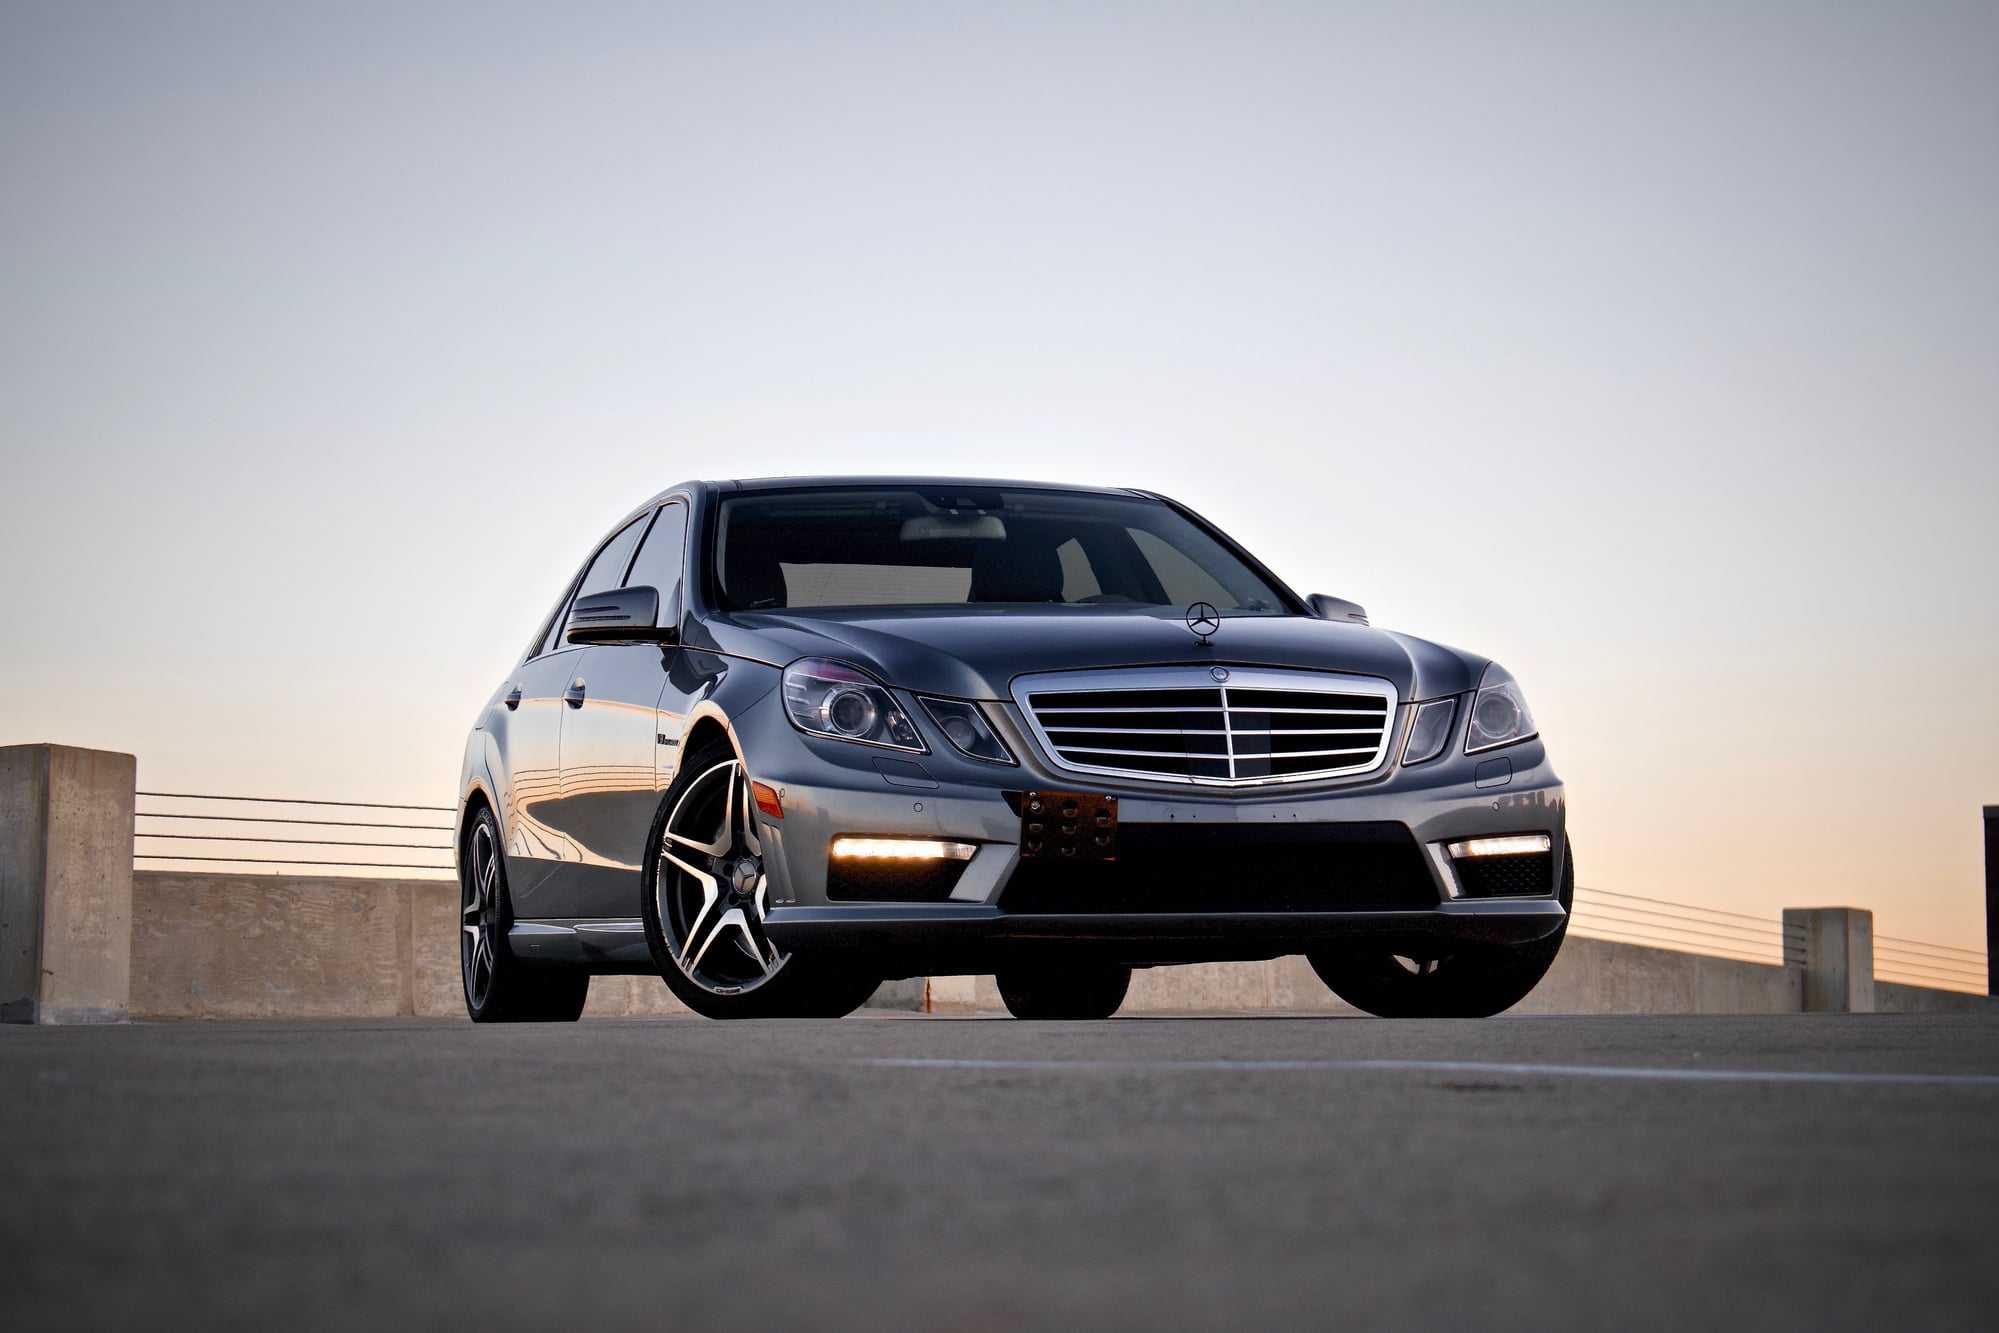 2012 Mercedes-Benz E63 AMG - 2012 E63 amg (610 WHP) - Used - VIN WDDHF7EB3CA532688 - 90,000 Miles - 8 cyl - 2WD - Automatic - Sedan - Silver - Fishers, IN 46055, United States